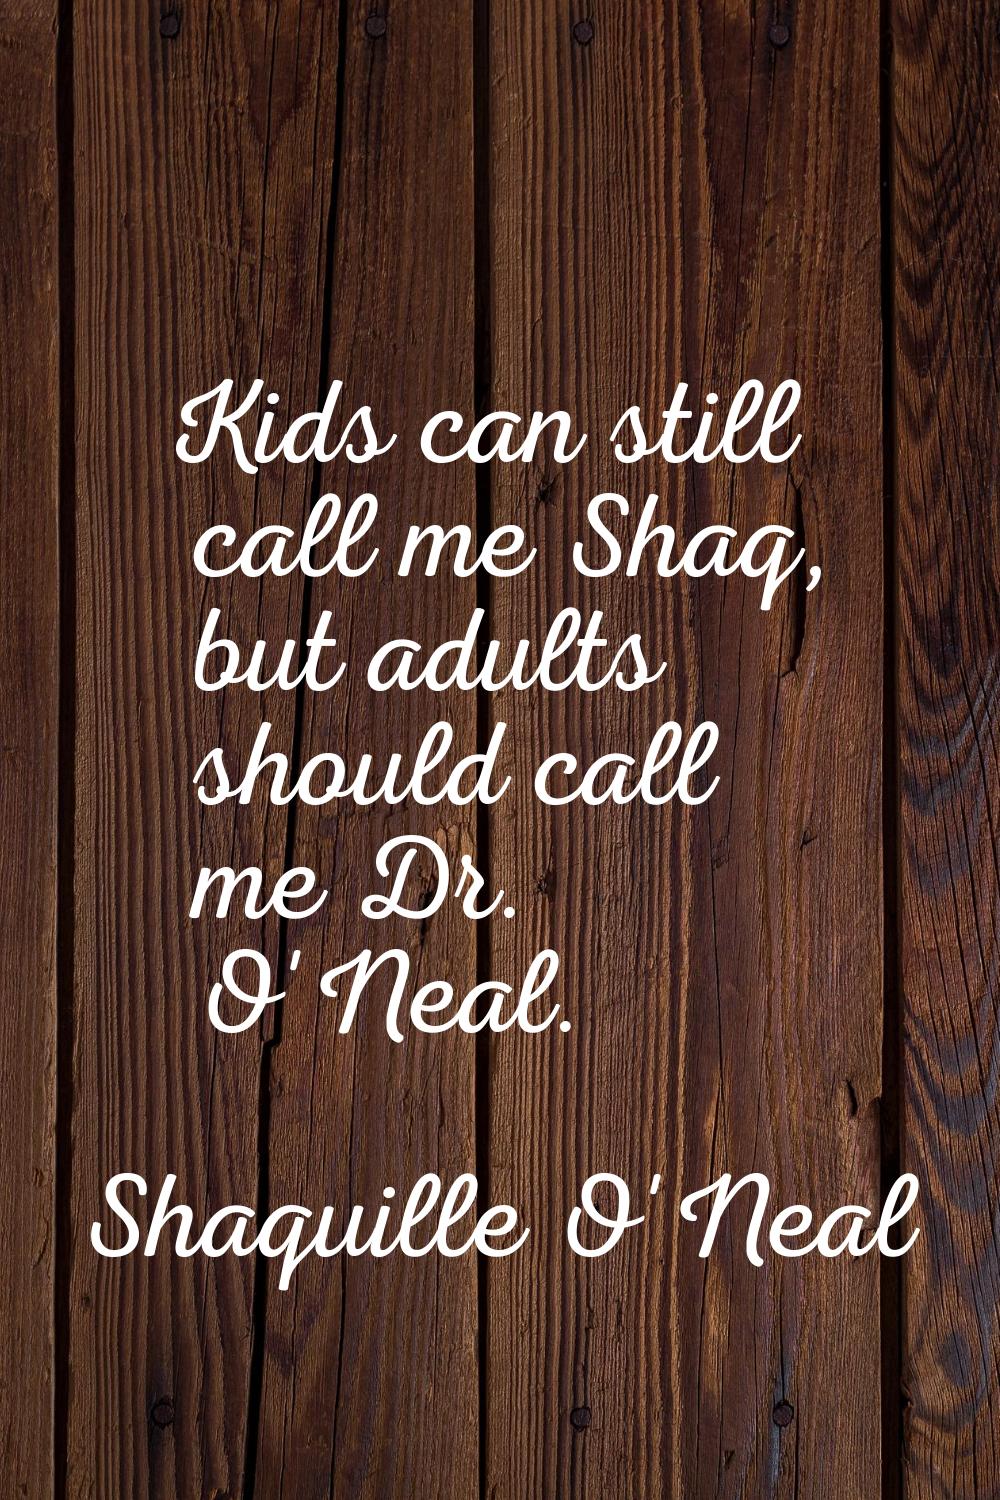 Kids can still call me Shaq, but adults should call me Dr. O'Neal.